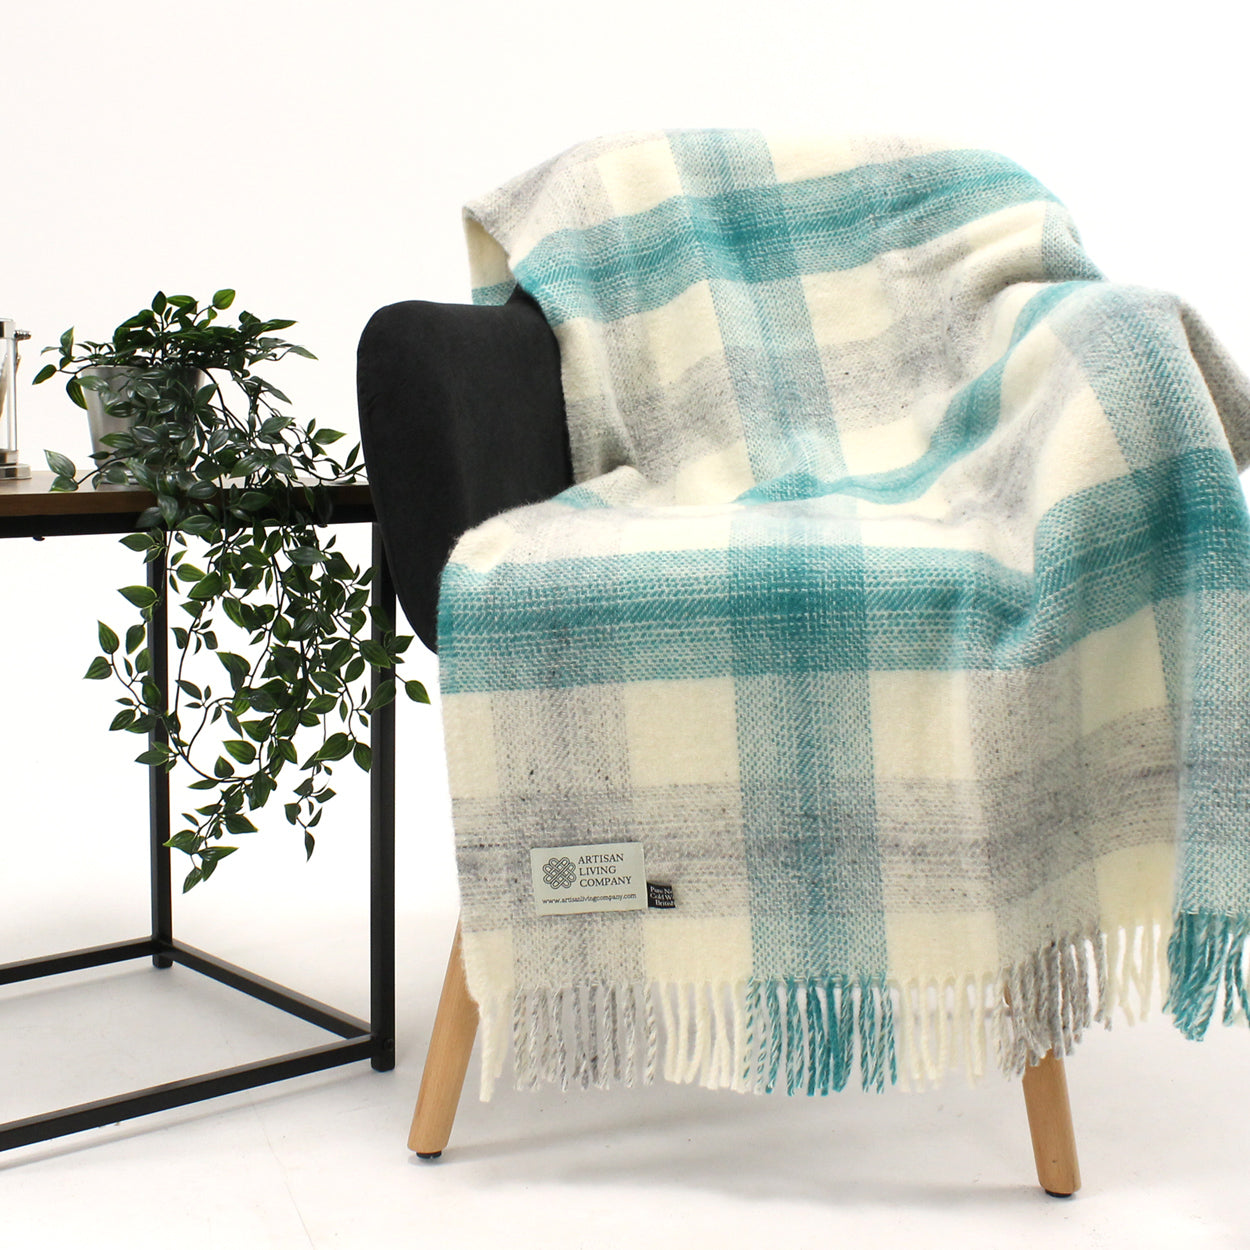 Meadow Check Blue & Grey Pure New Wool Throw